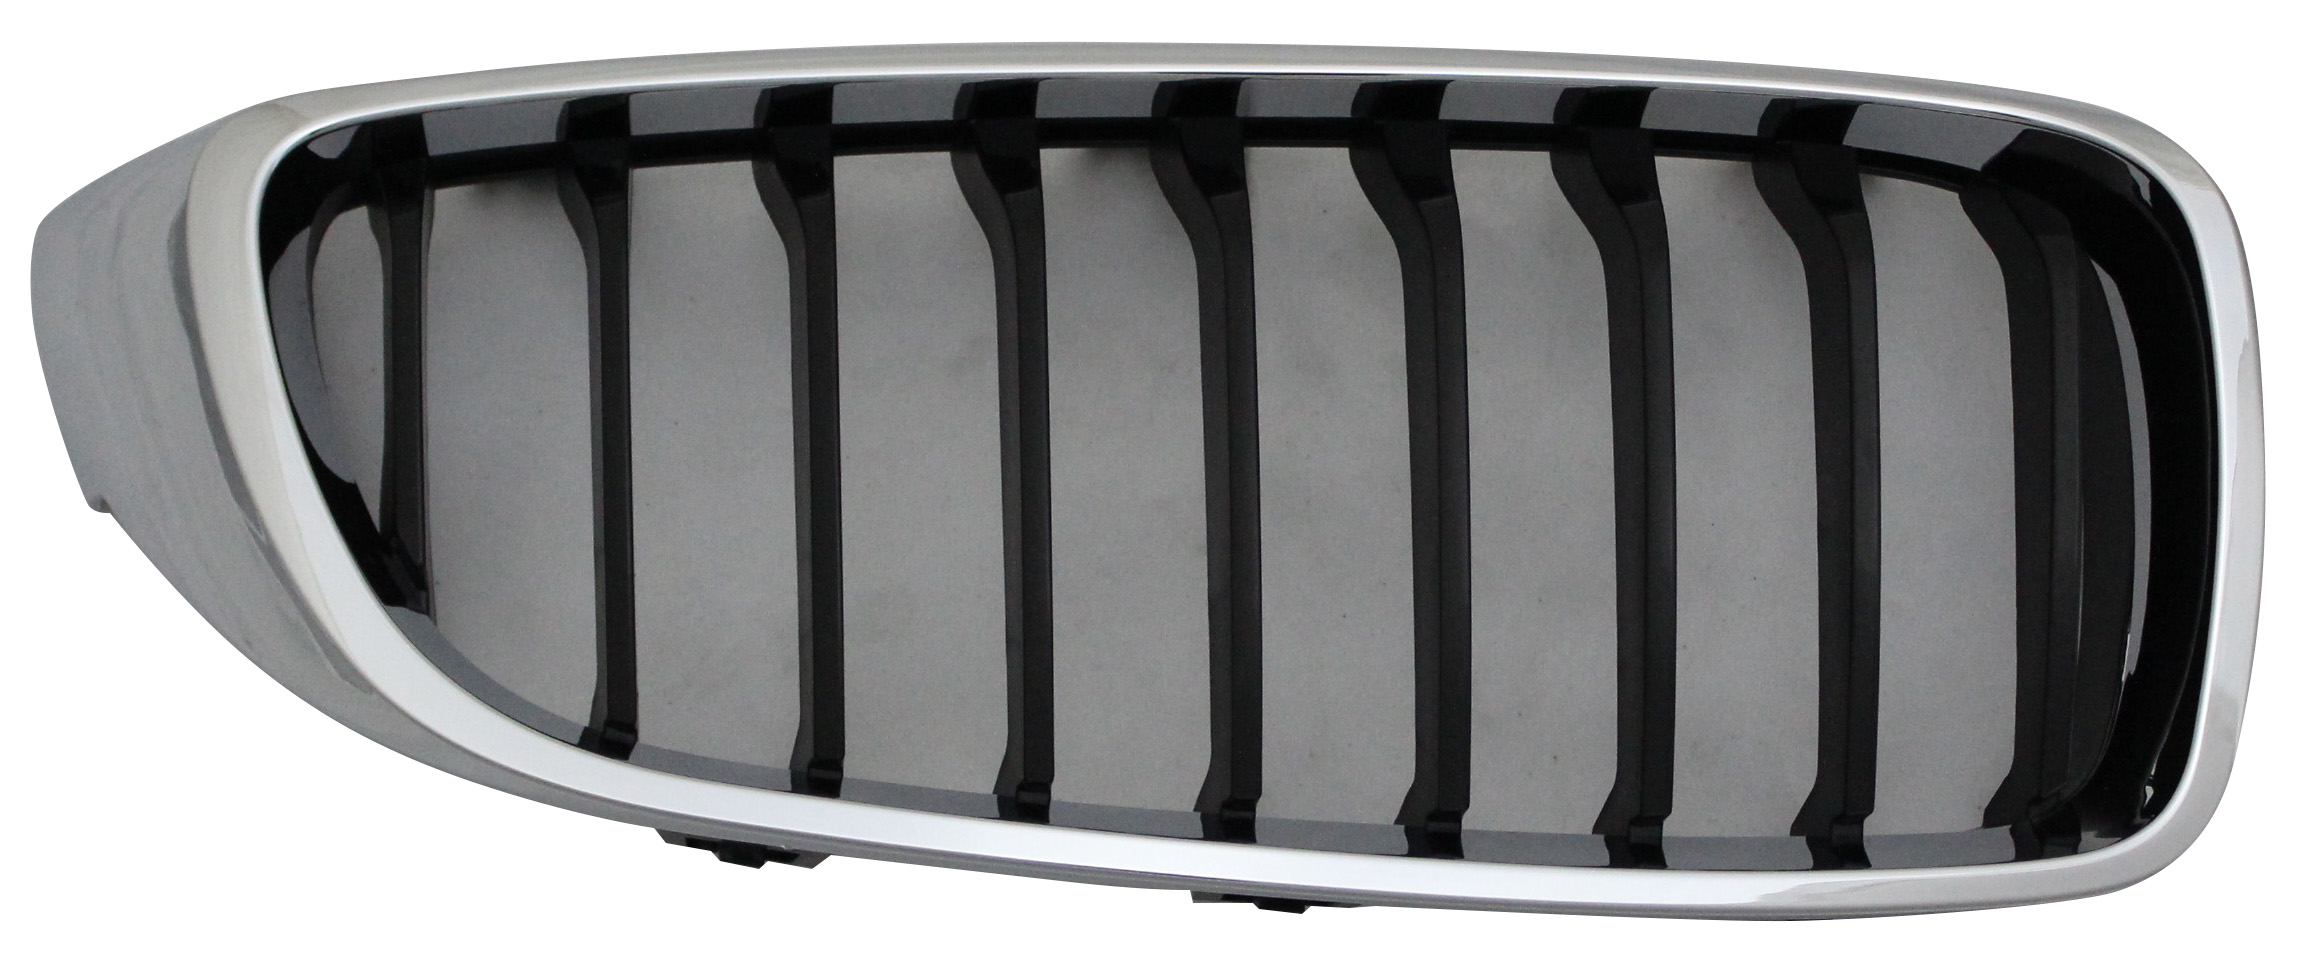 Aftermarket GRILLES for BMW - 430I GRAN COUPE, 430i Gran Coupe,17-19,Grille assy